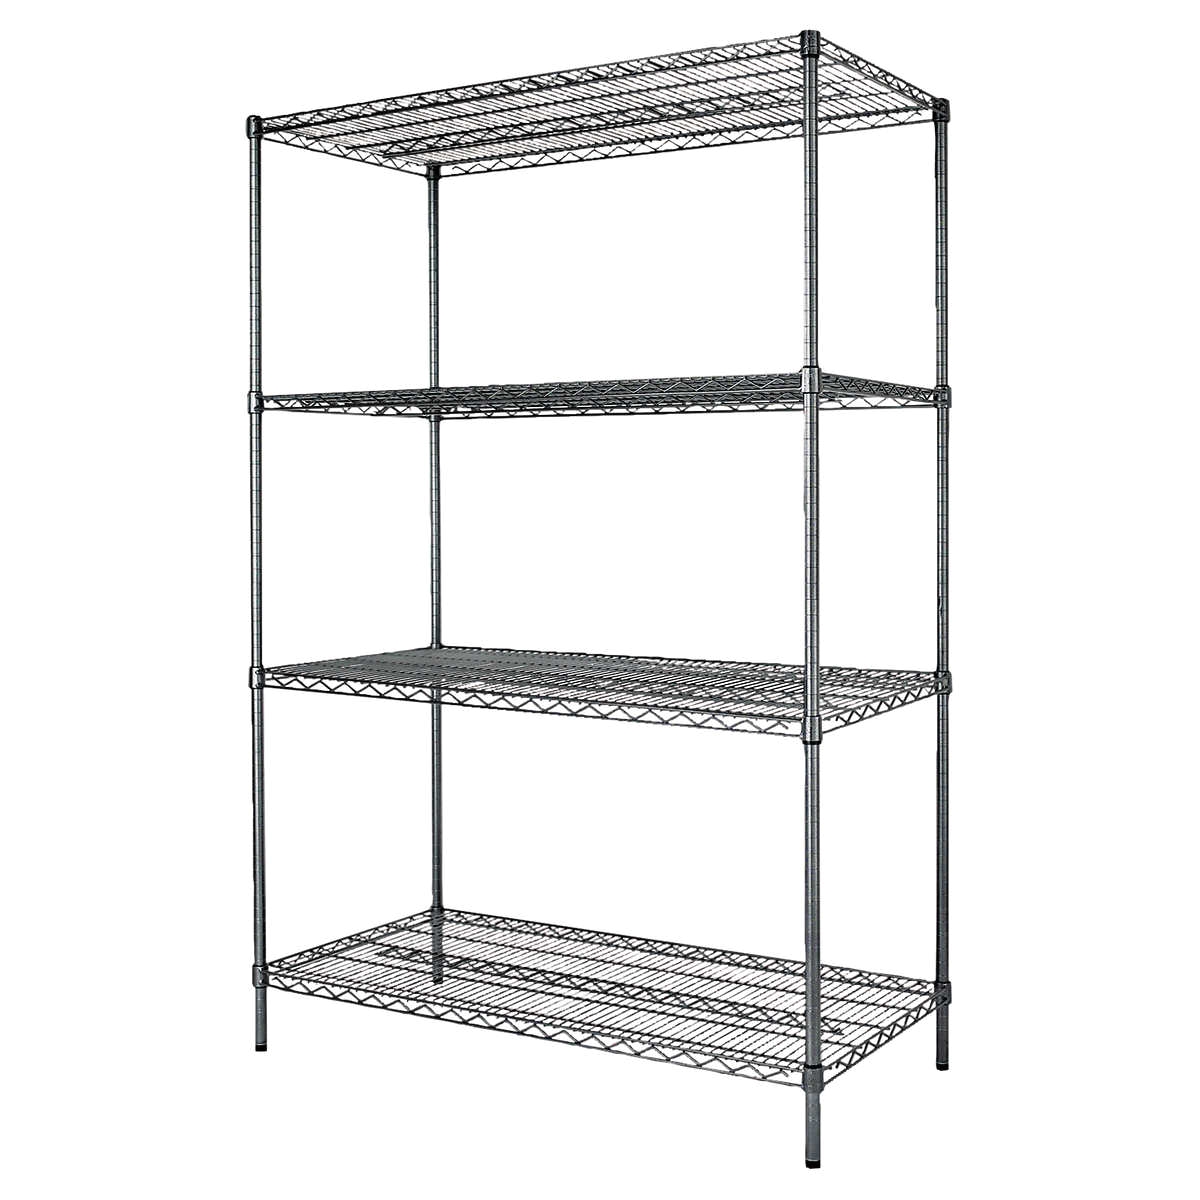 Costco Wire Shelving Racks Shelves How to Remodel Storage Shelves Pictures Concept Build